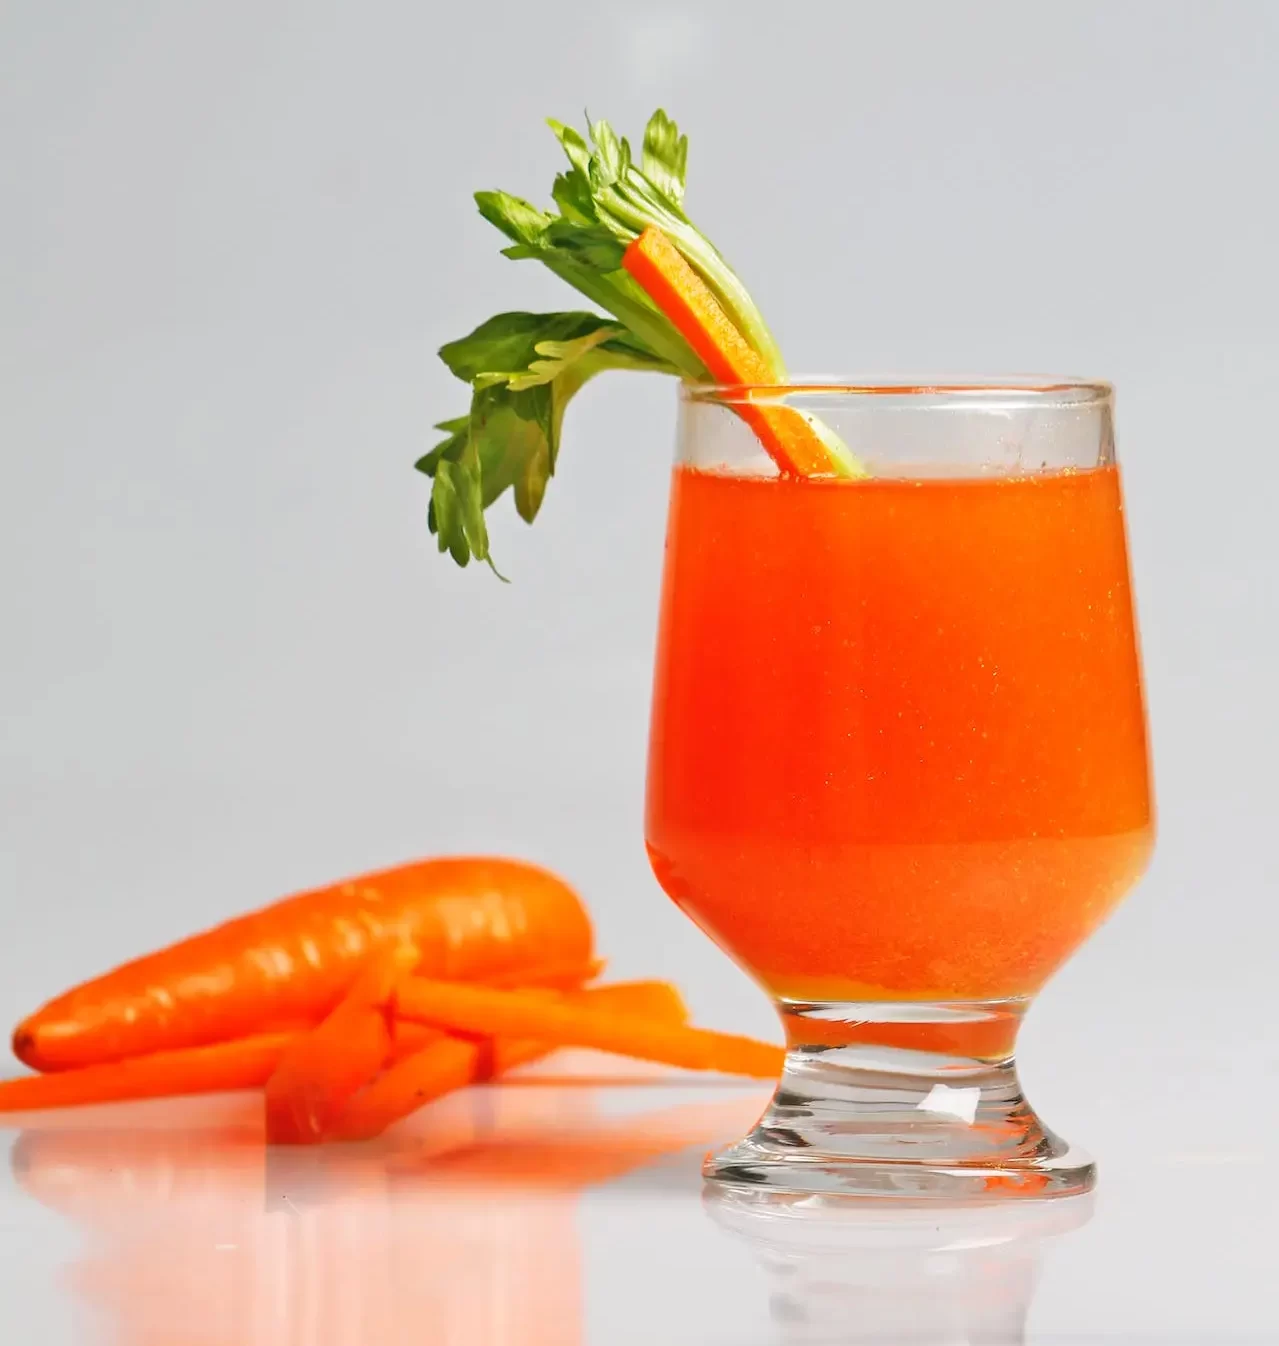 How to Juice a Carrot Without a Juicer?